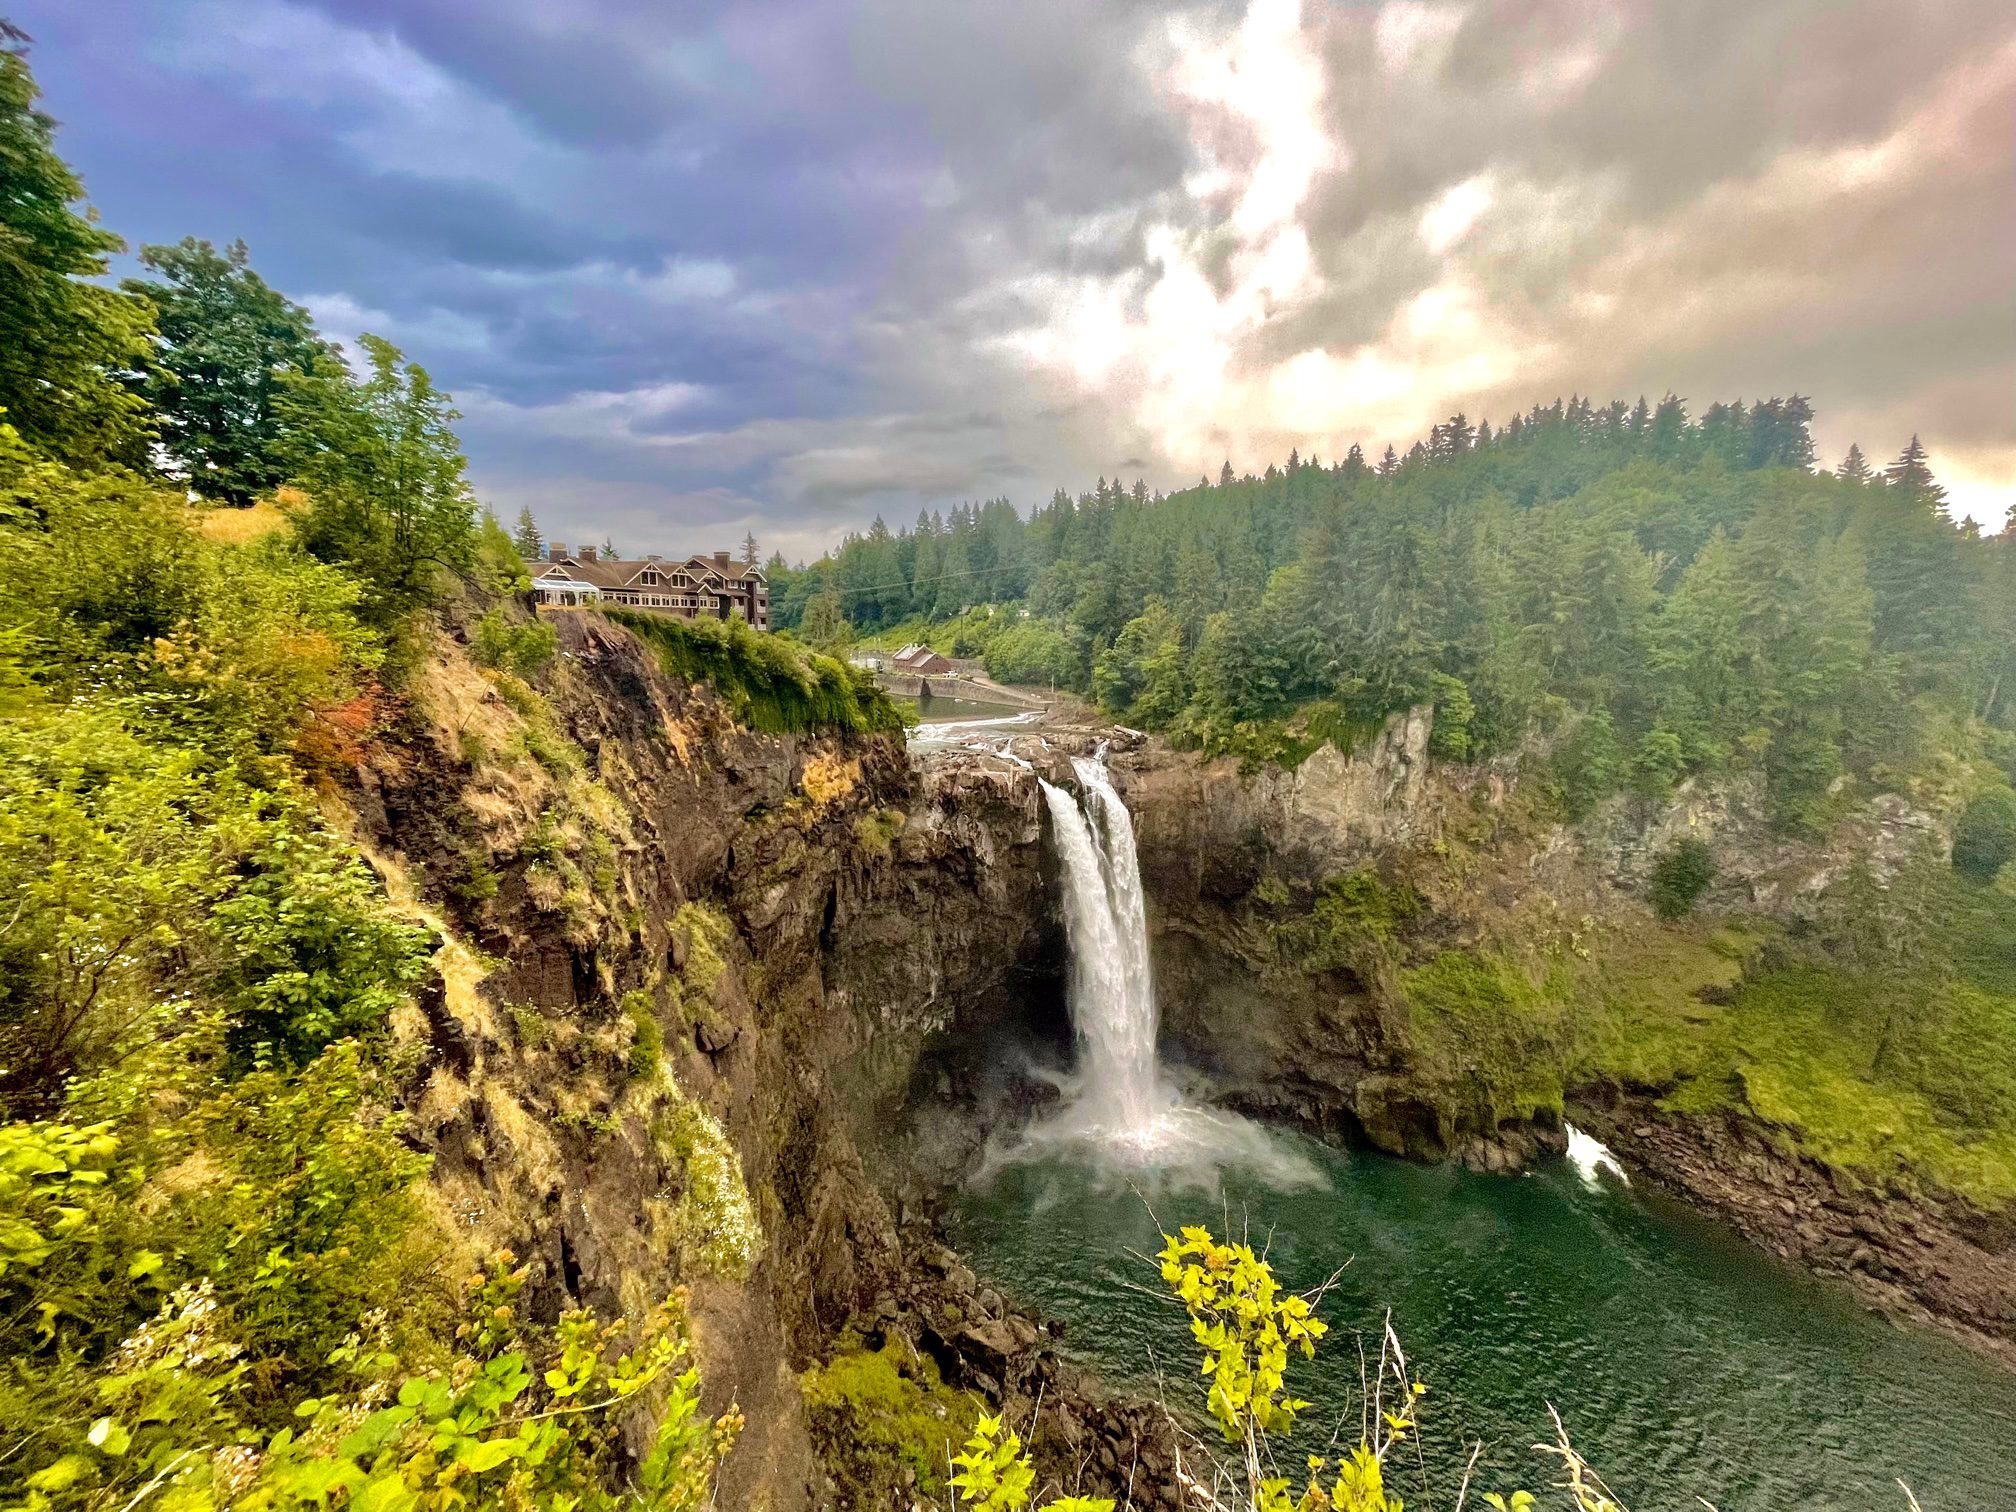 15 Thrilling Things to Do in Snoqualmie, Washington